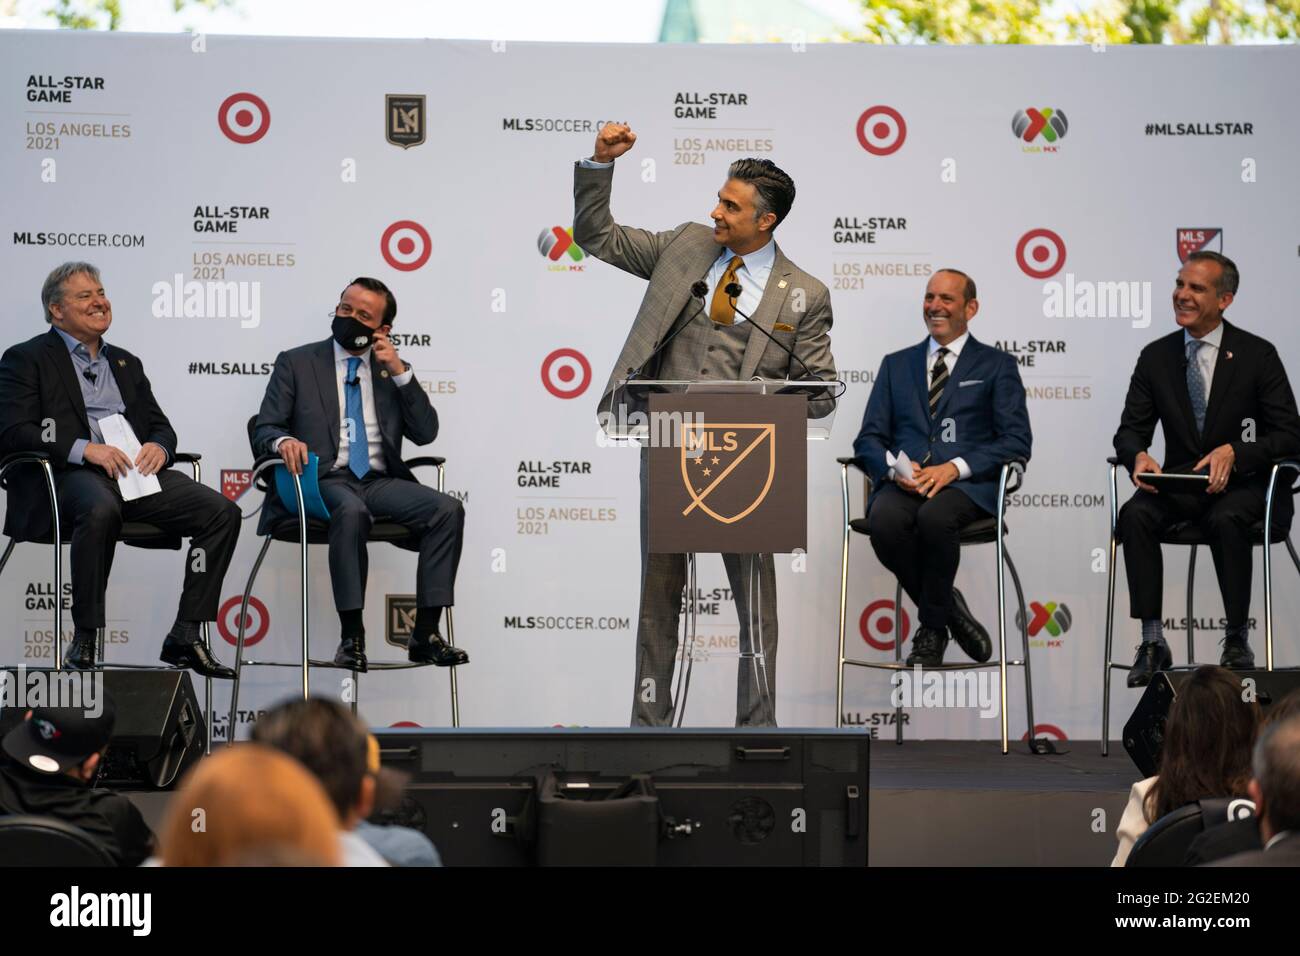 Jaime Camil speaks during a MLS and LIGA MX press announcement at Banc of California, Wednesday, June 9, 2021, in Los Angeles, CA. (Jon Endow/Image of Stock Photo